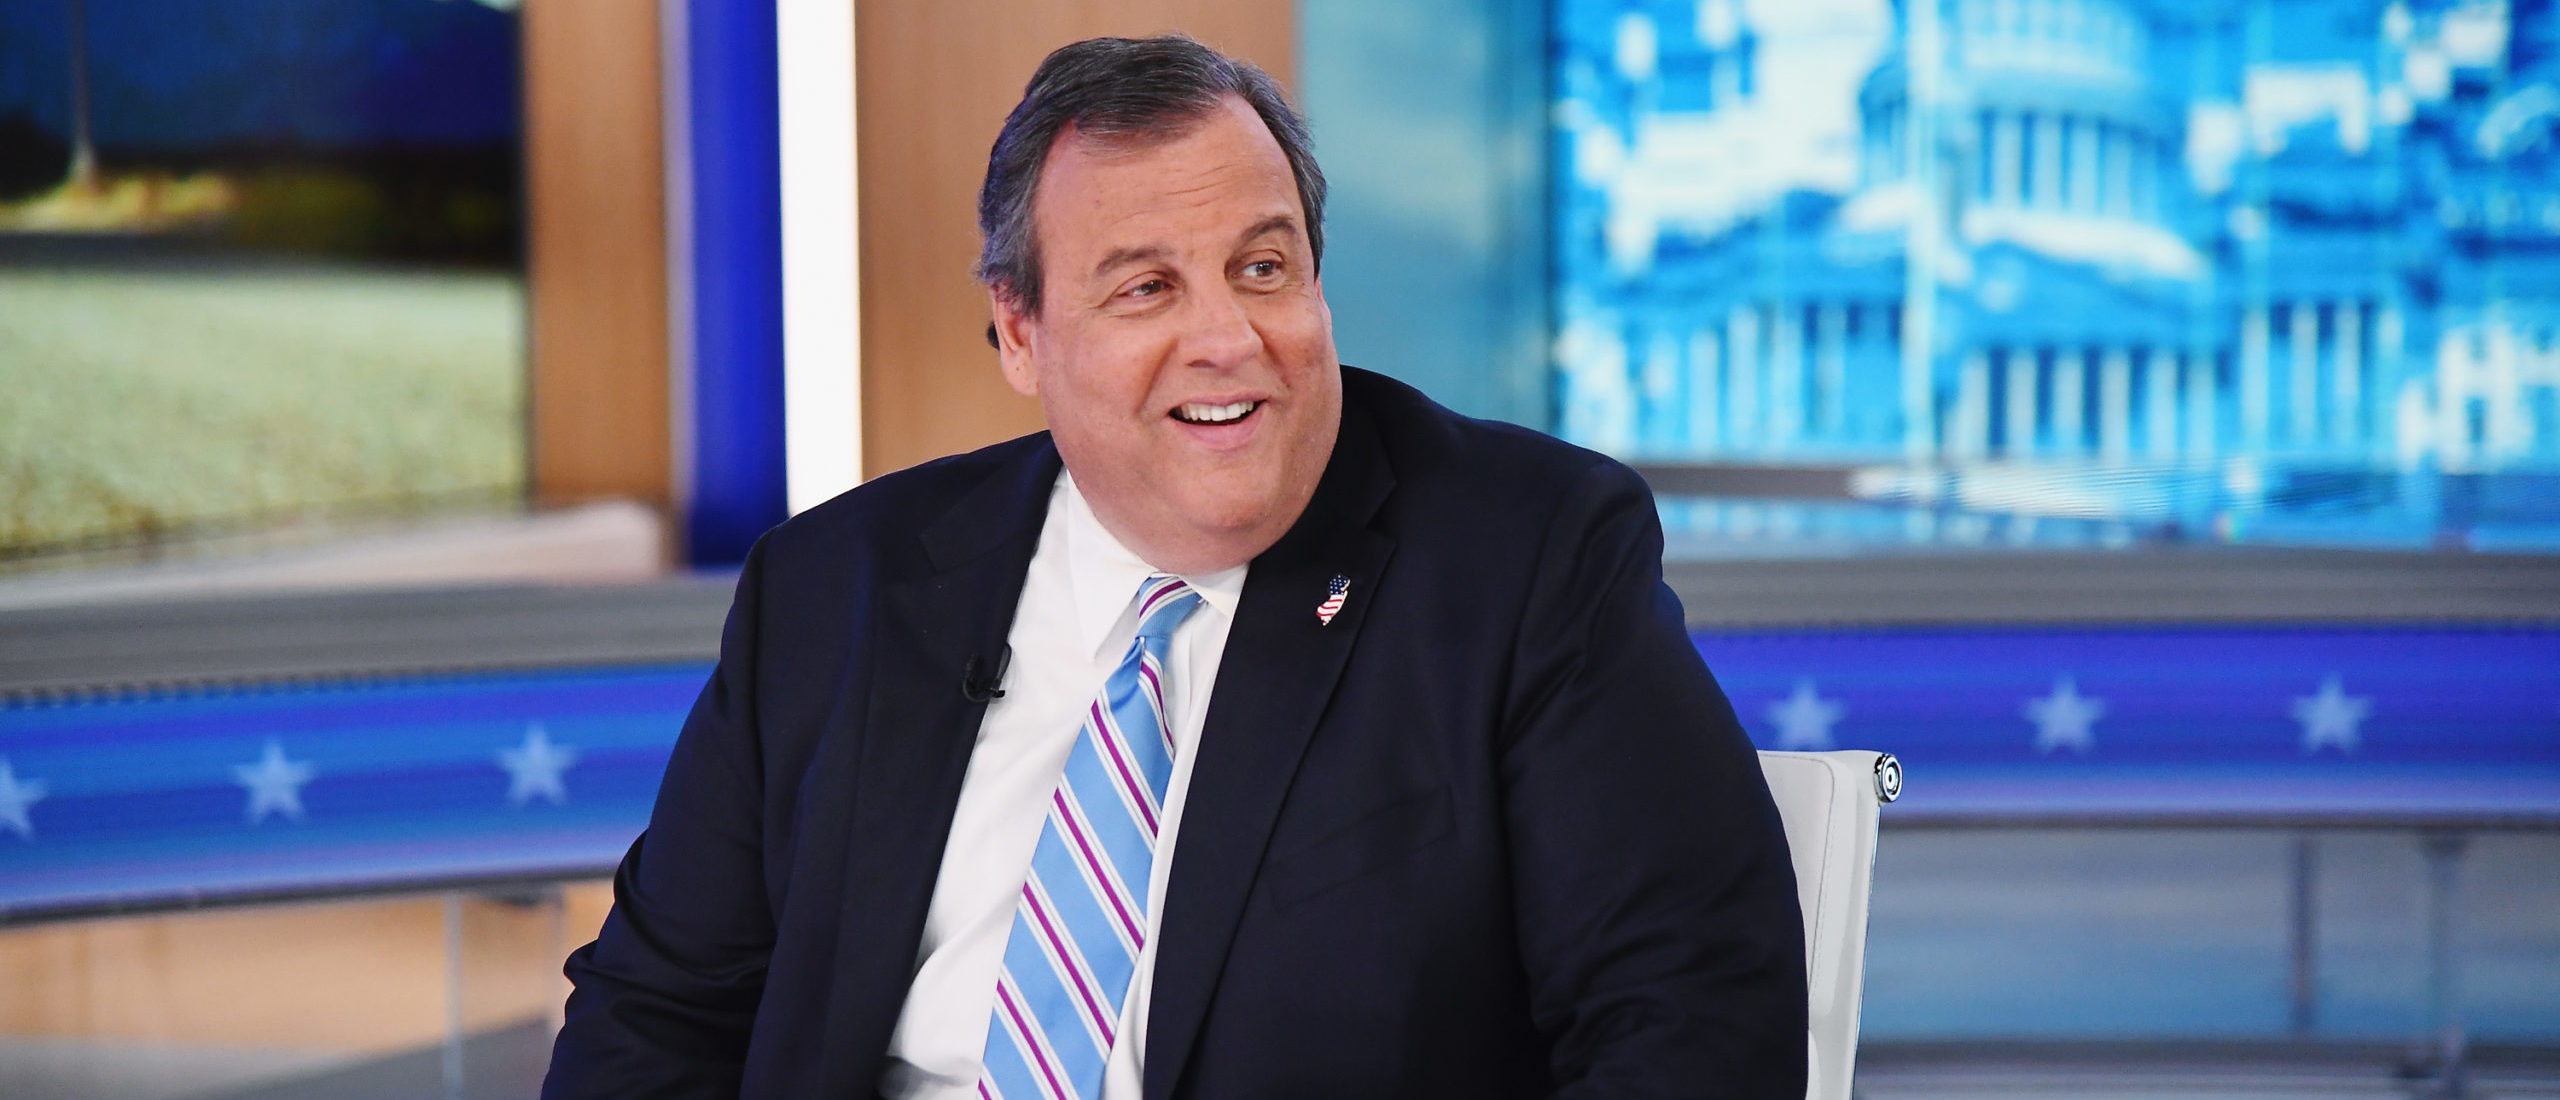 NEW YORK, NEW YORK - JANUARY 30: Former Governor Of New Jersey Chris Christie visits "The Daily Briefing With Dana Perino" at Fox News Channel Studios on January 30, 2019 in New York City. (Photo by Nicholas Hunt/Getty Images)